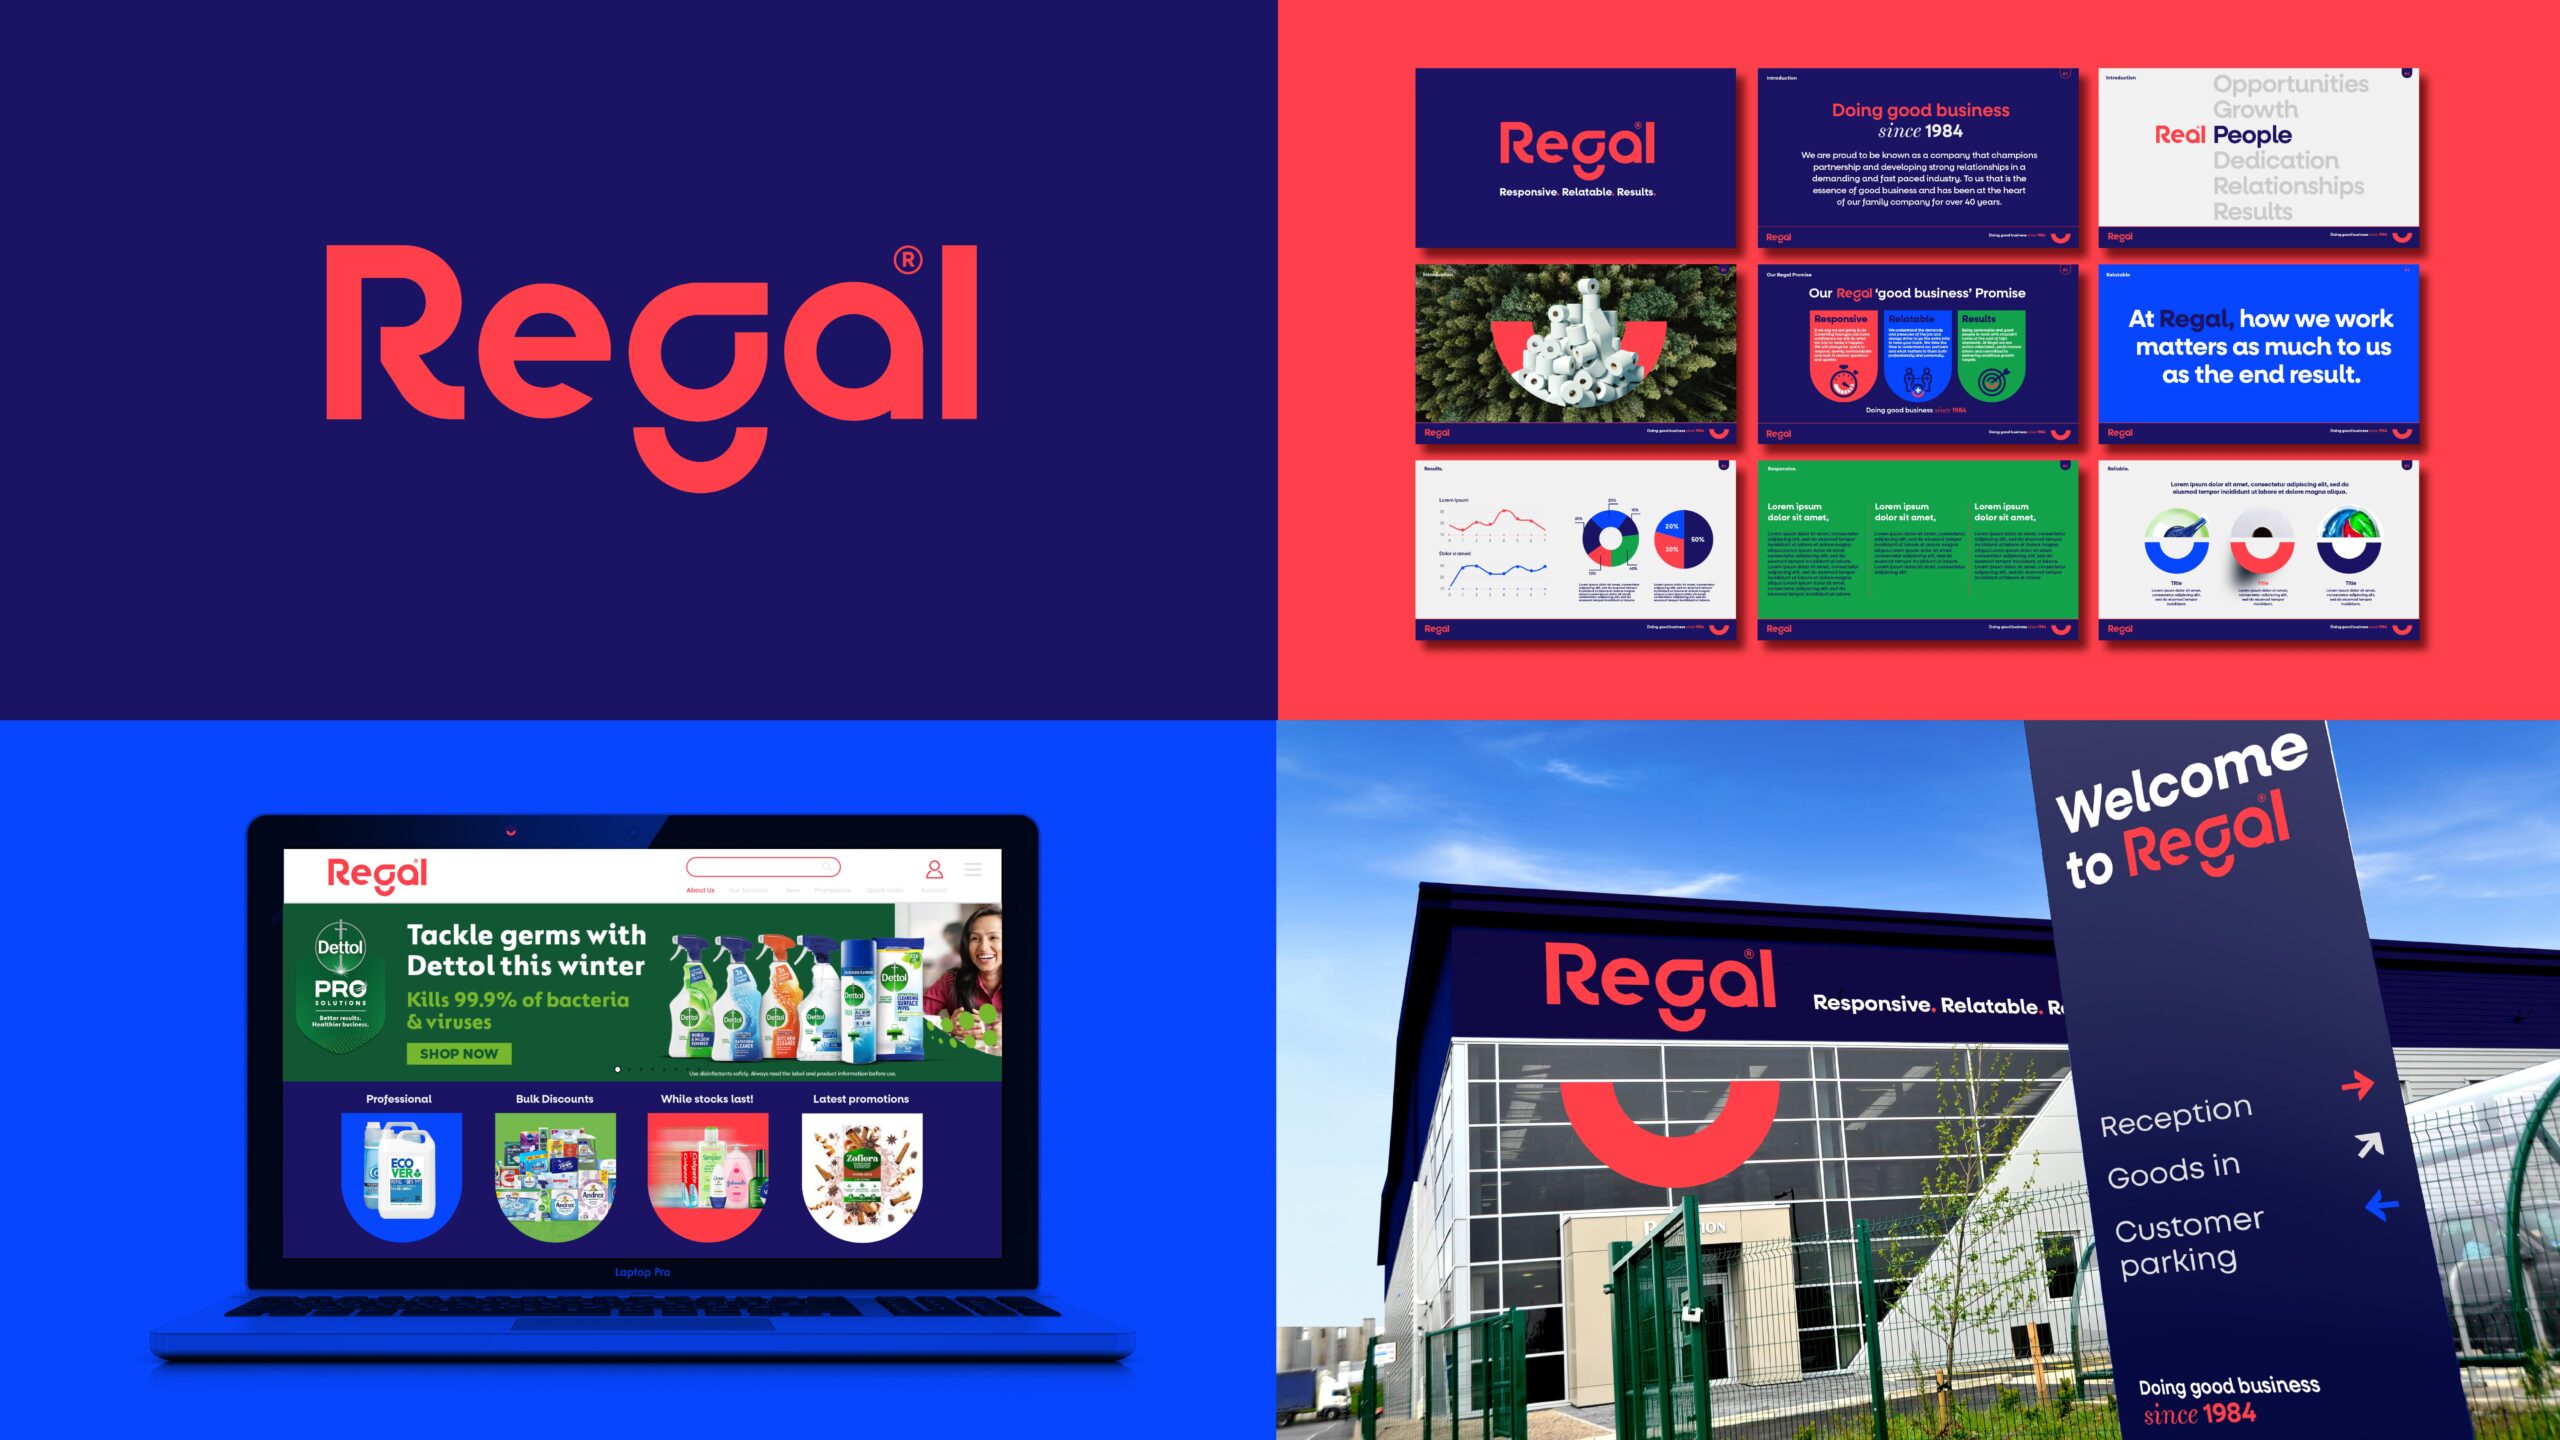 Regal Group - The most recent addition to Regal fleet was handed